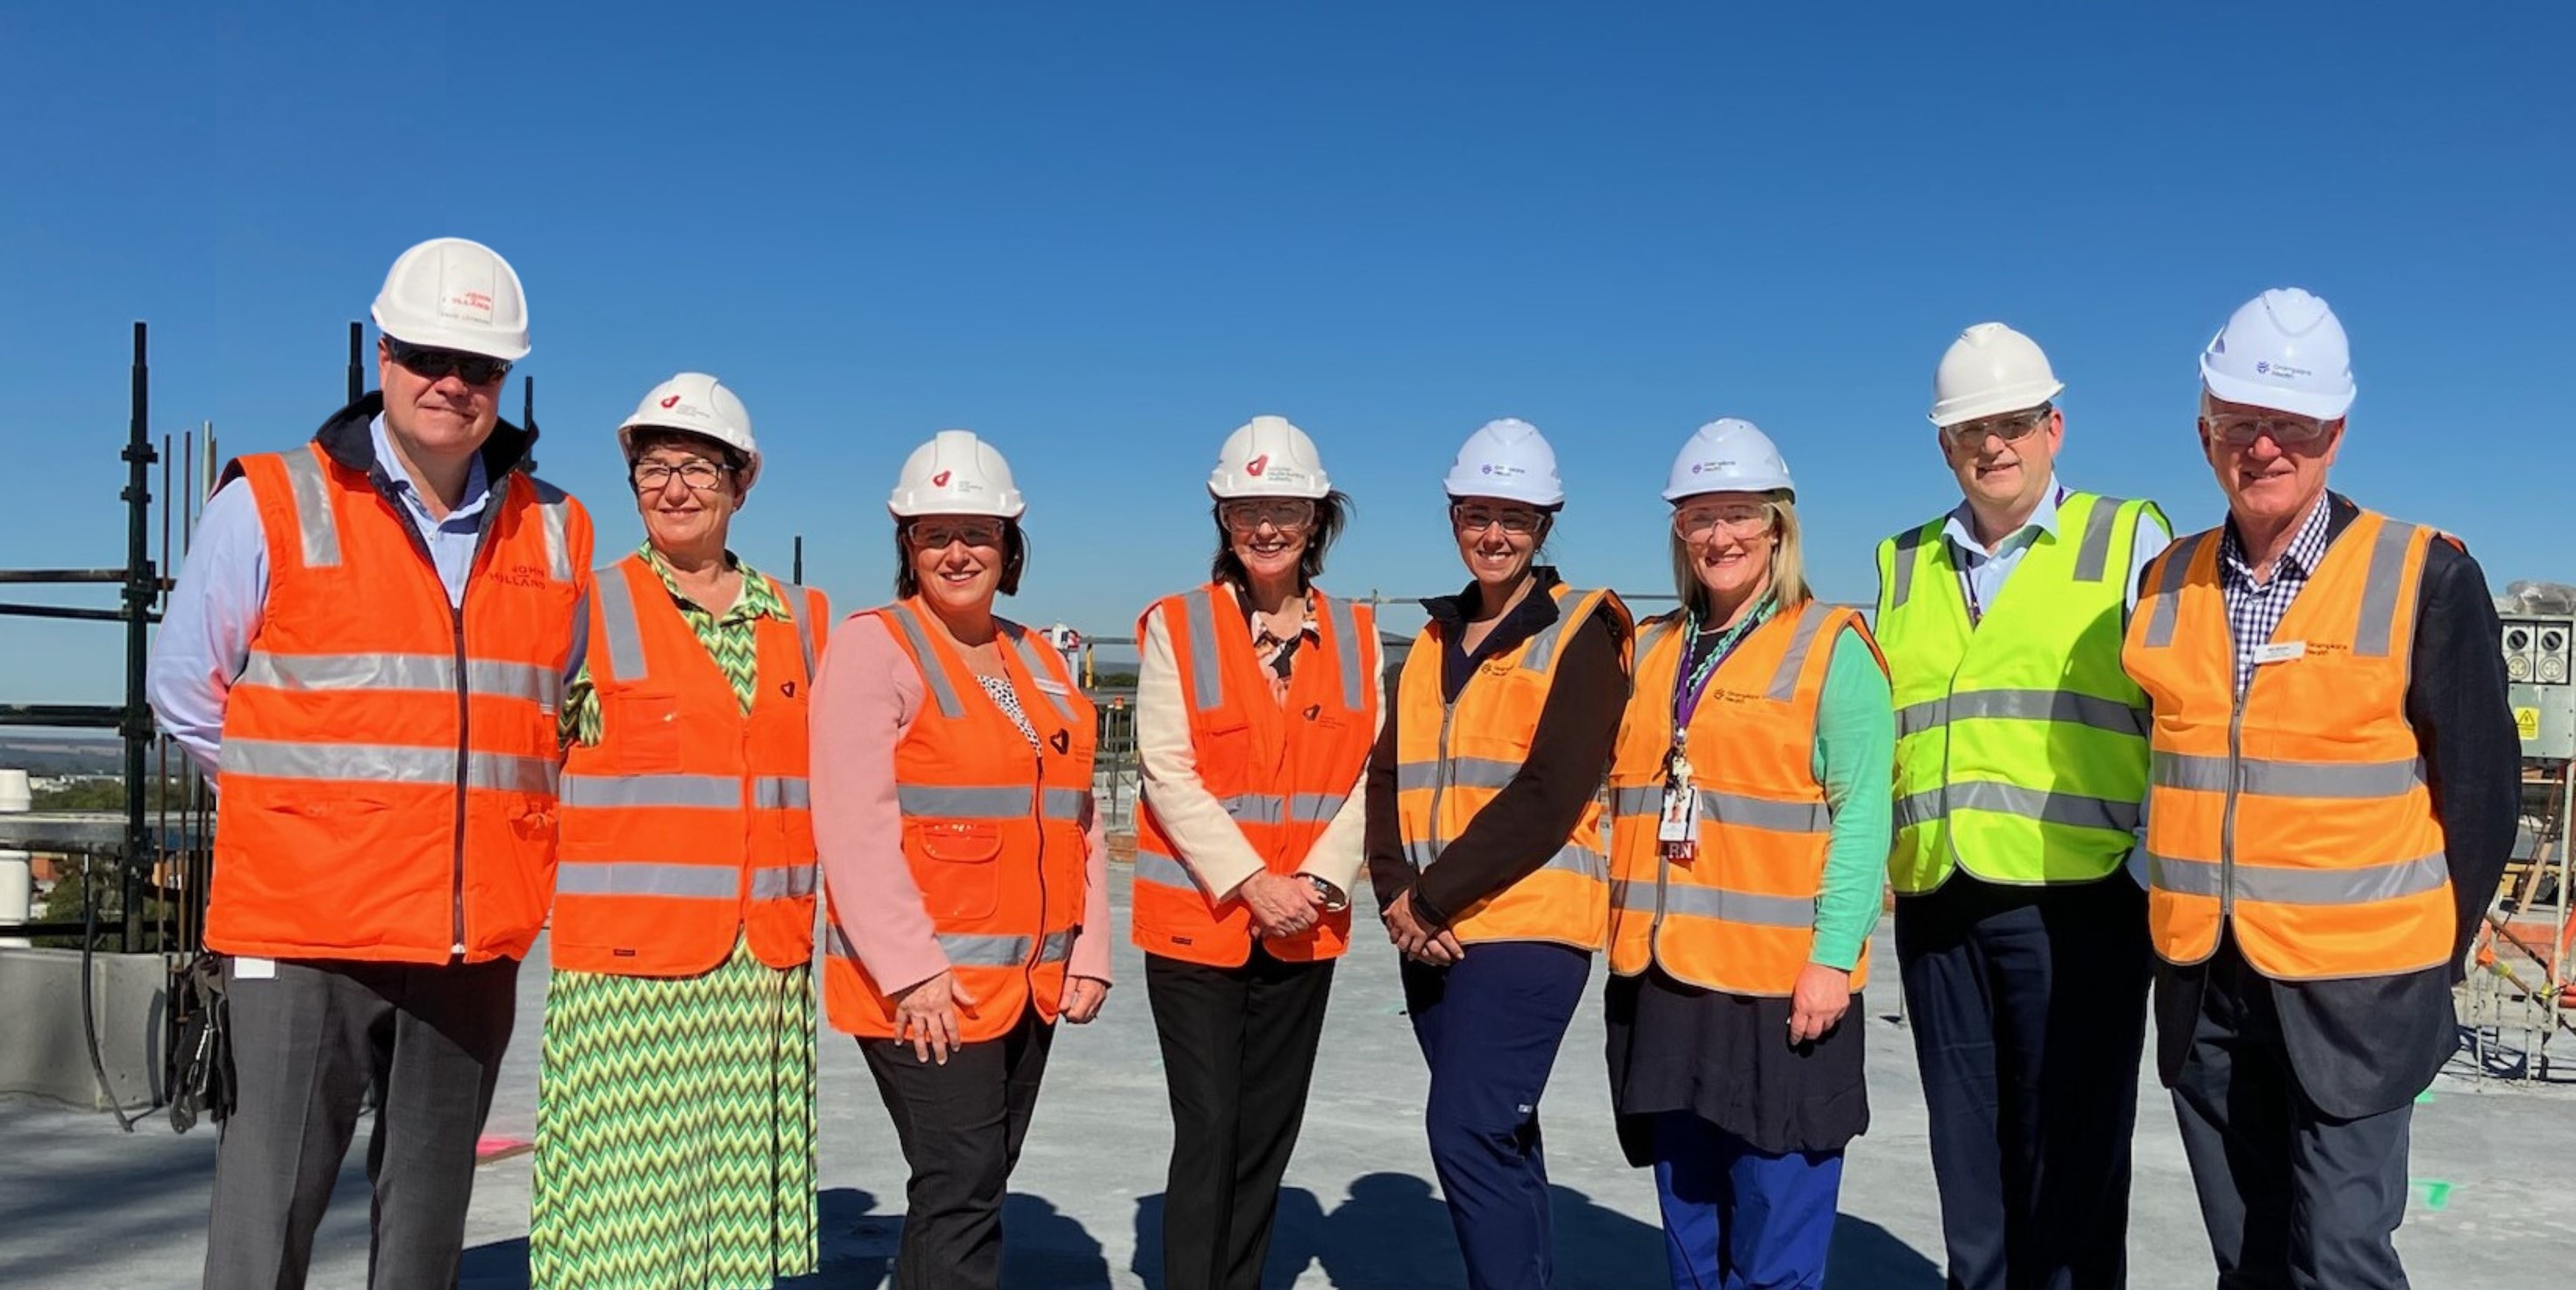 New heights reached - topping out ceremony marks key milestone in Ballarat Base Hospital Redevelopment